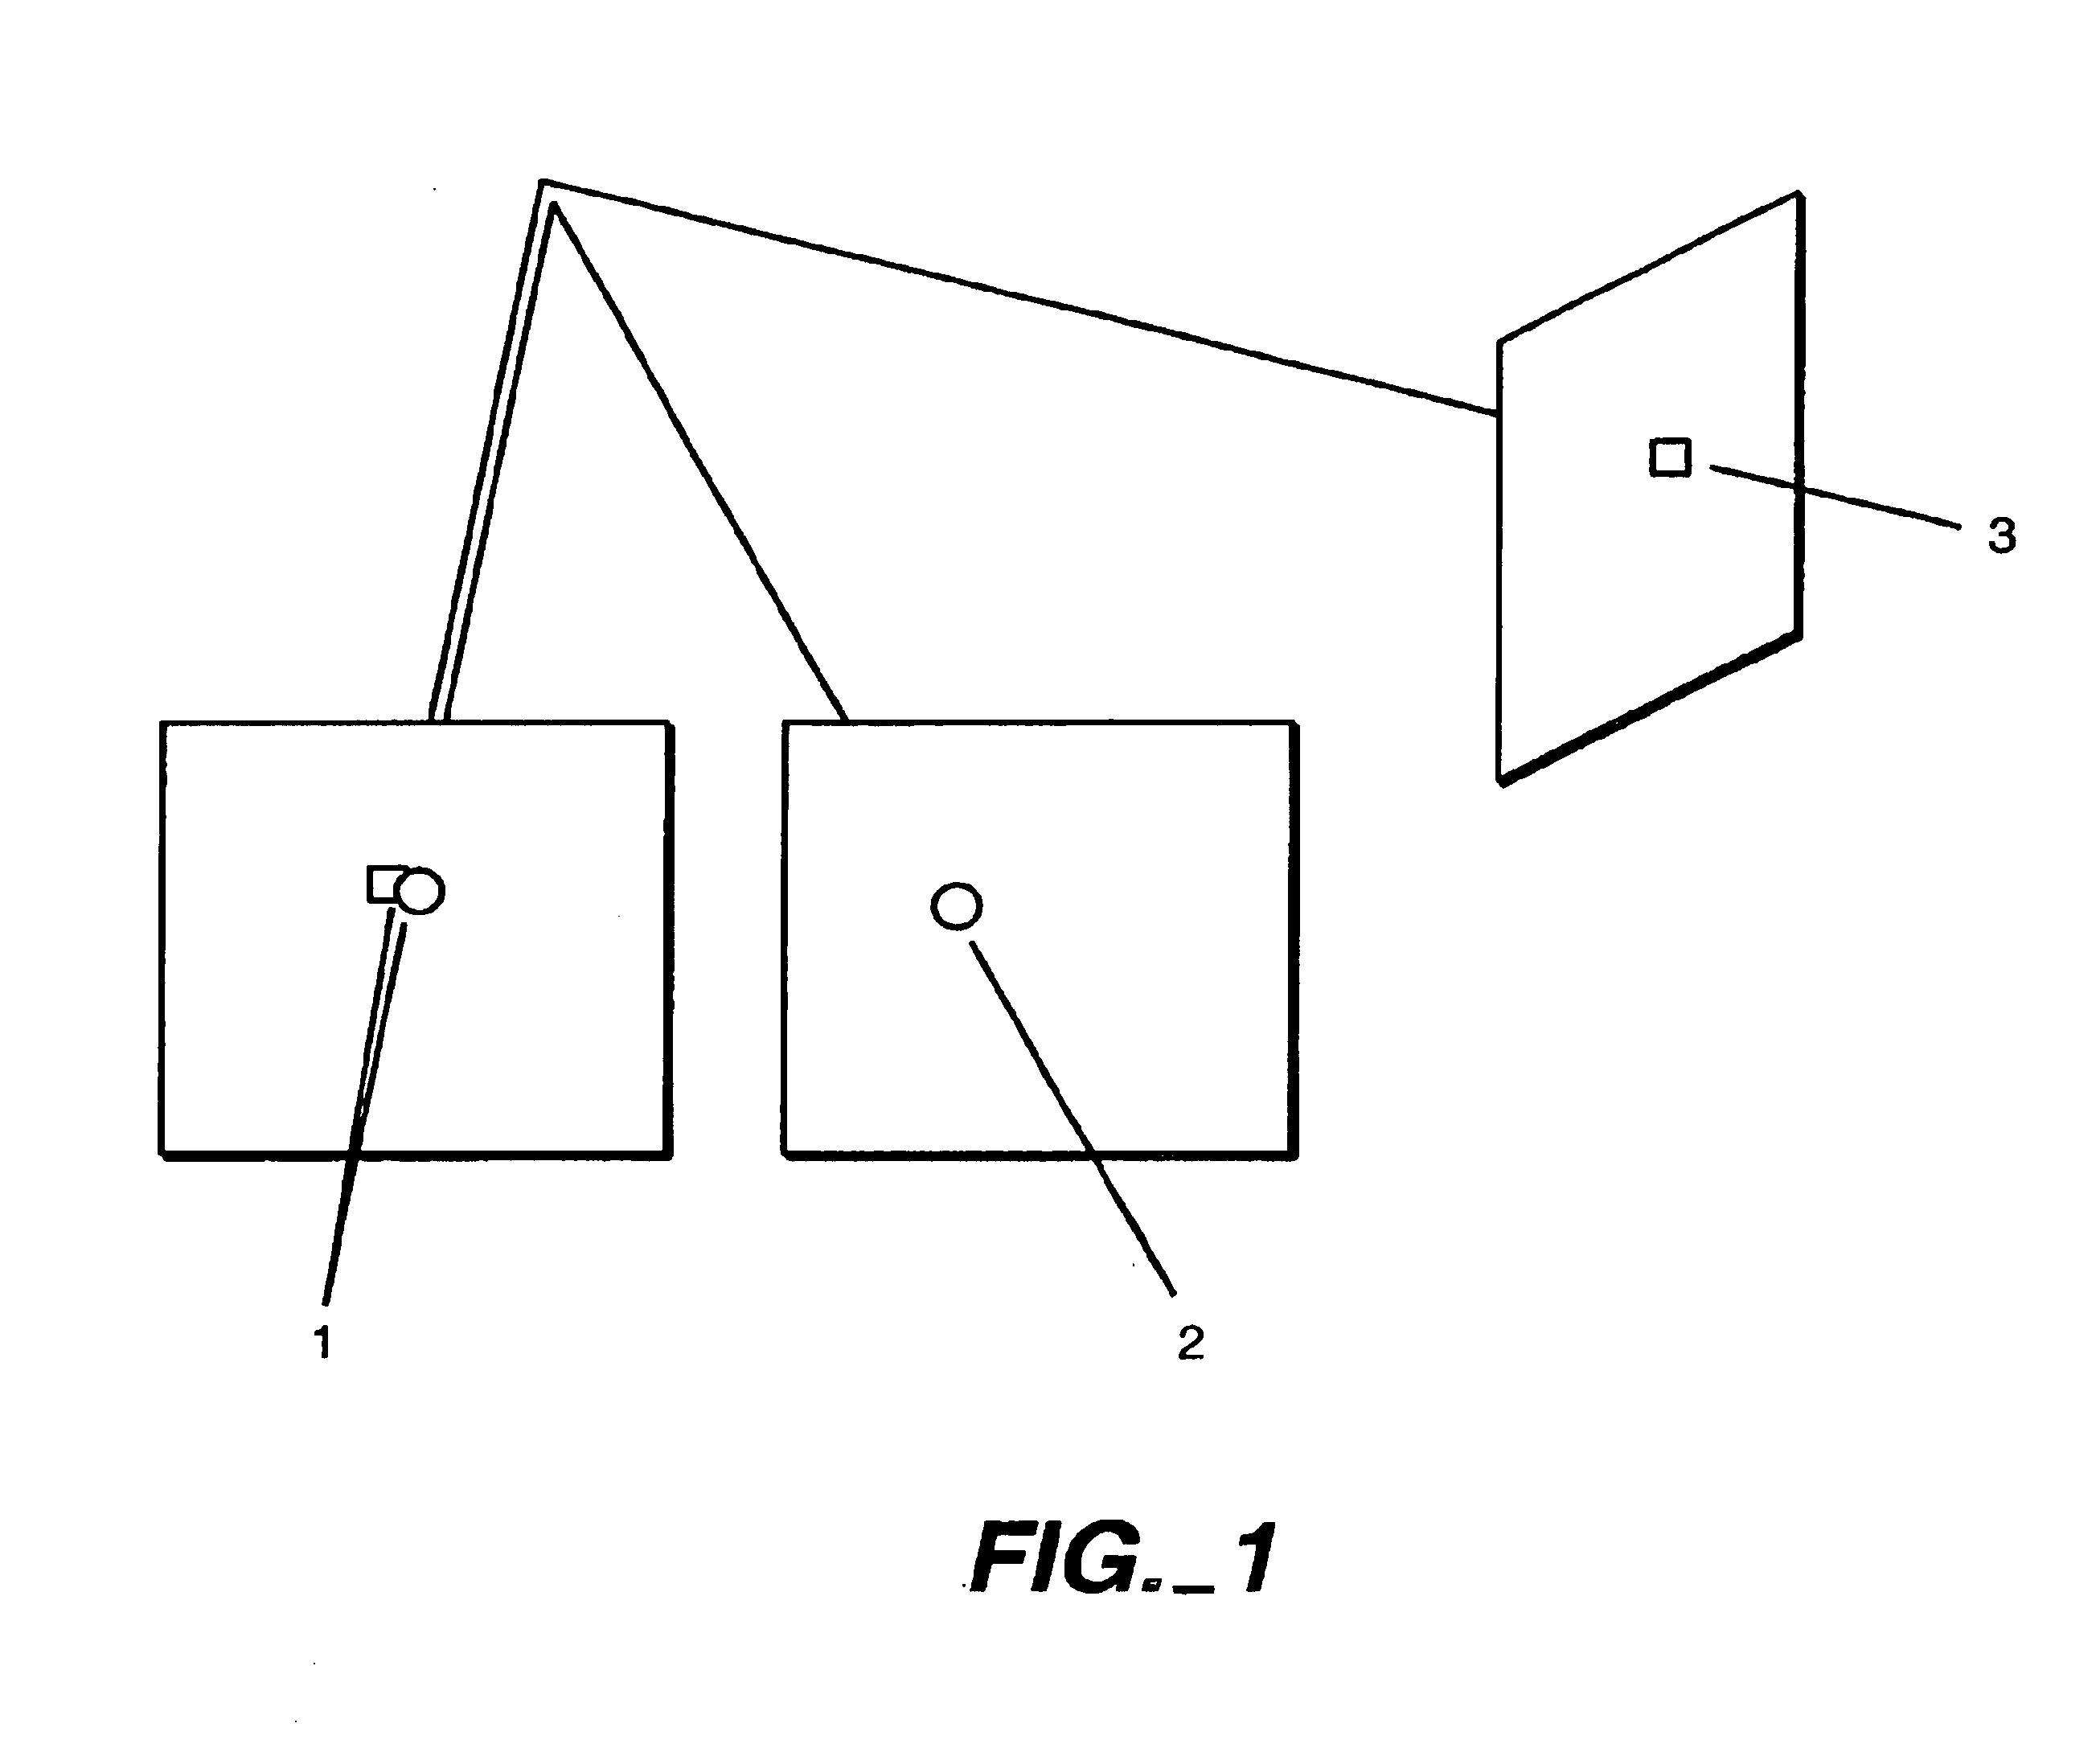 Method and system for detecting changes in three dimensional shape